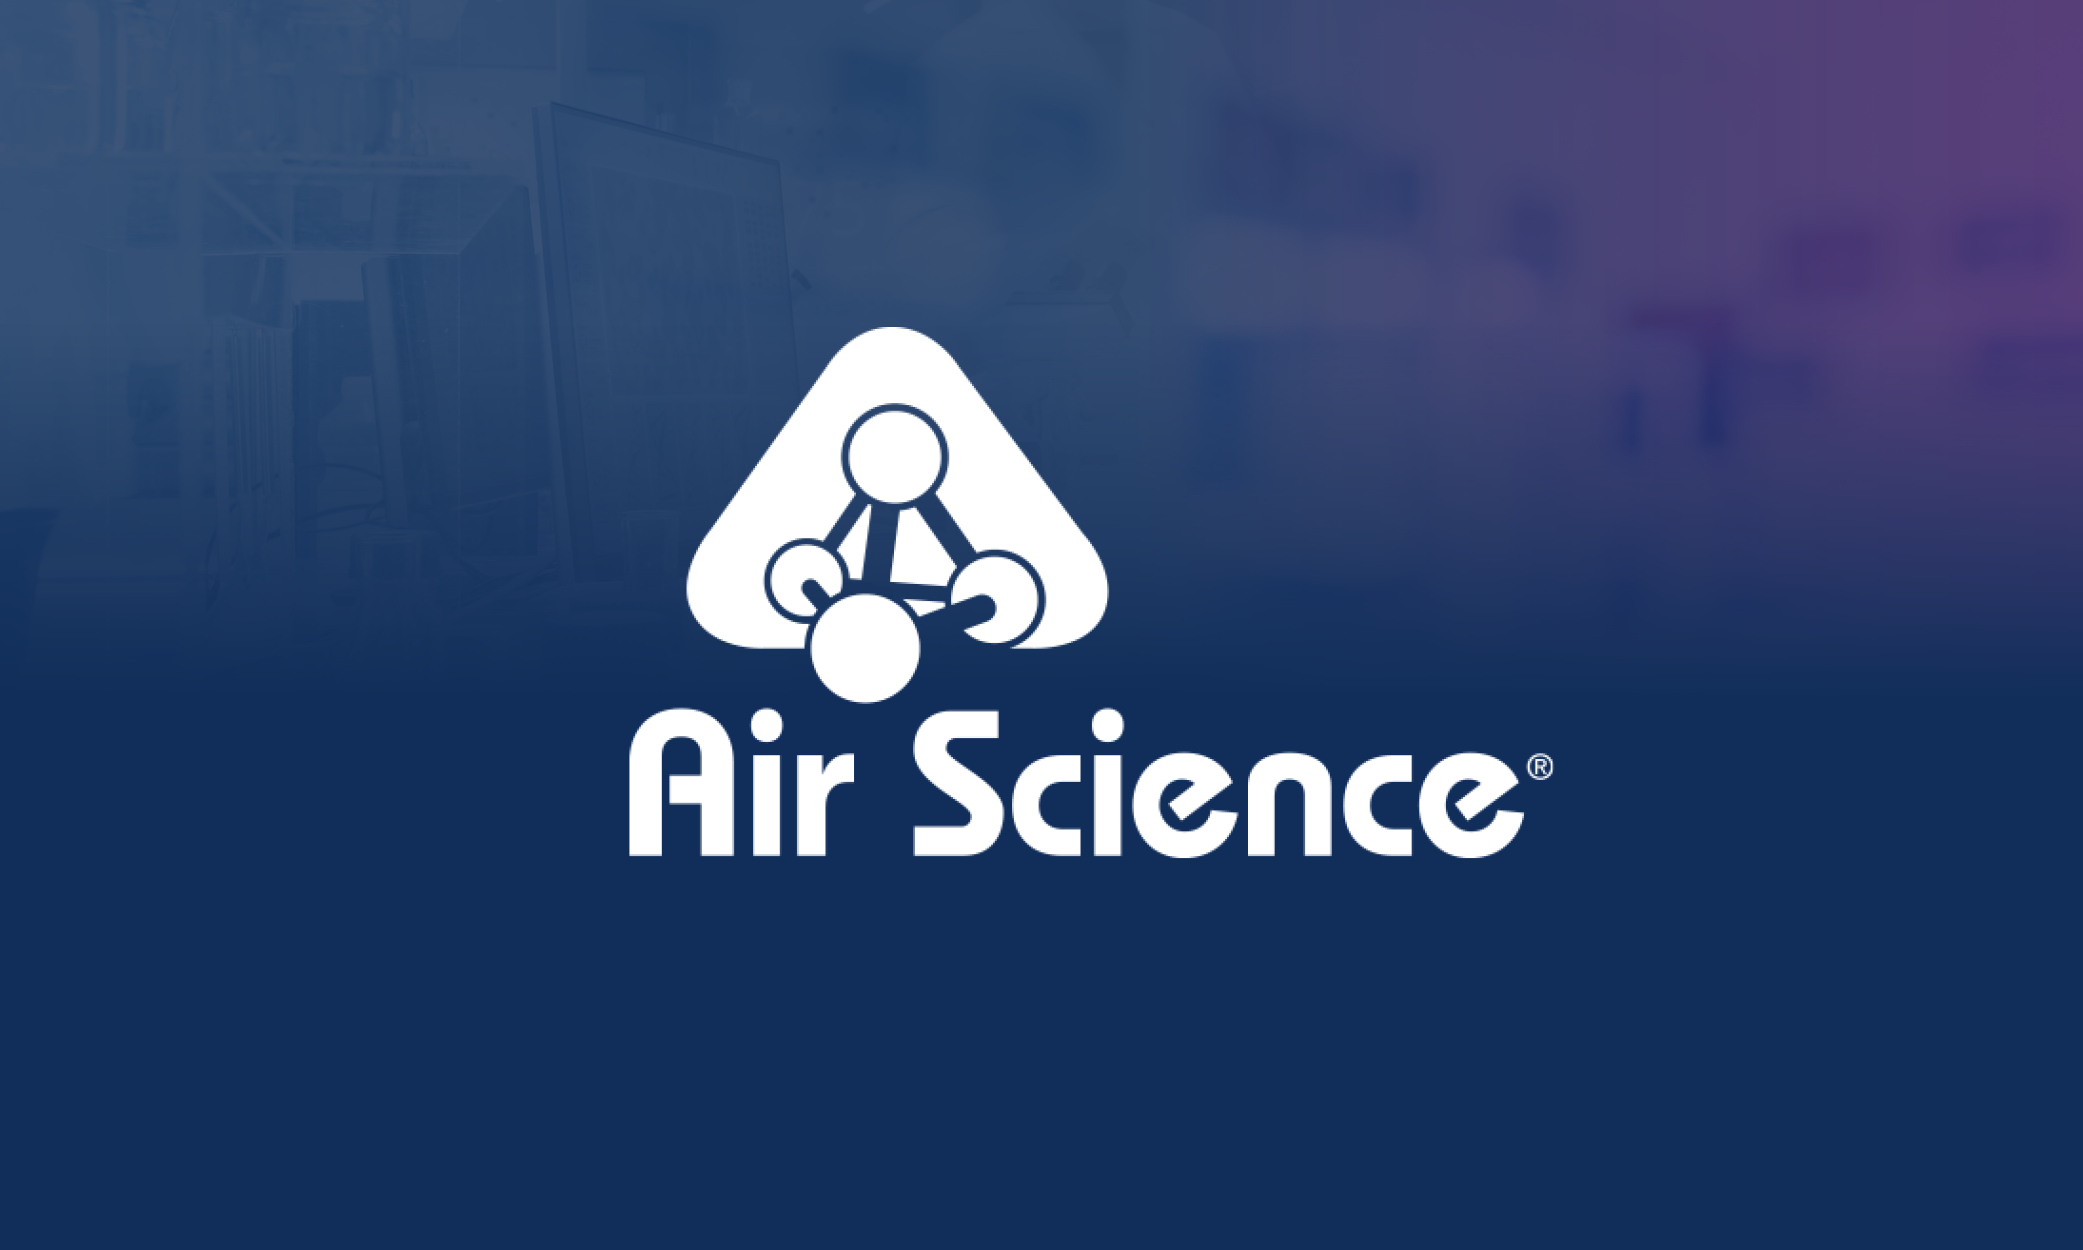 Improve your Laboratory Indoor Air Quality with Purair® SKY